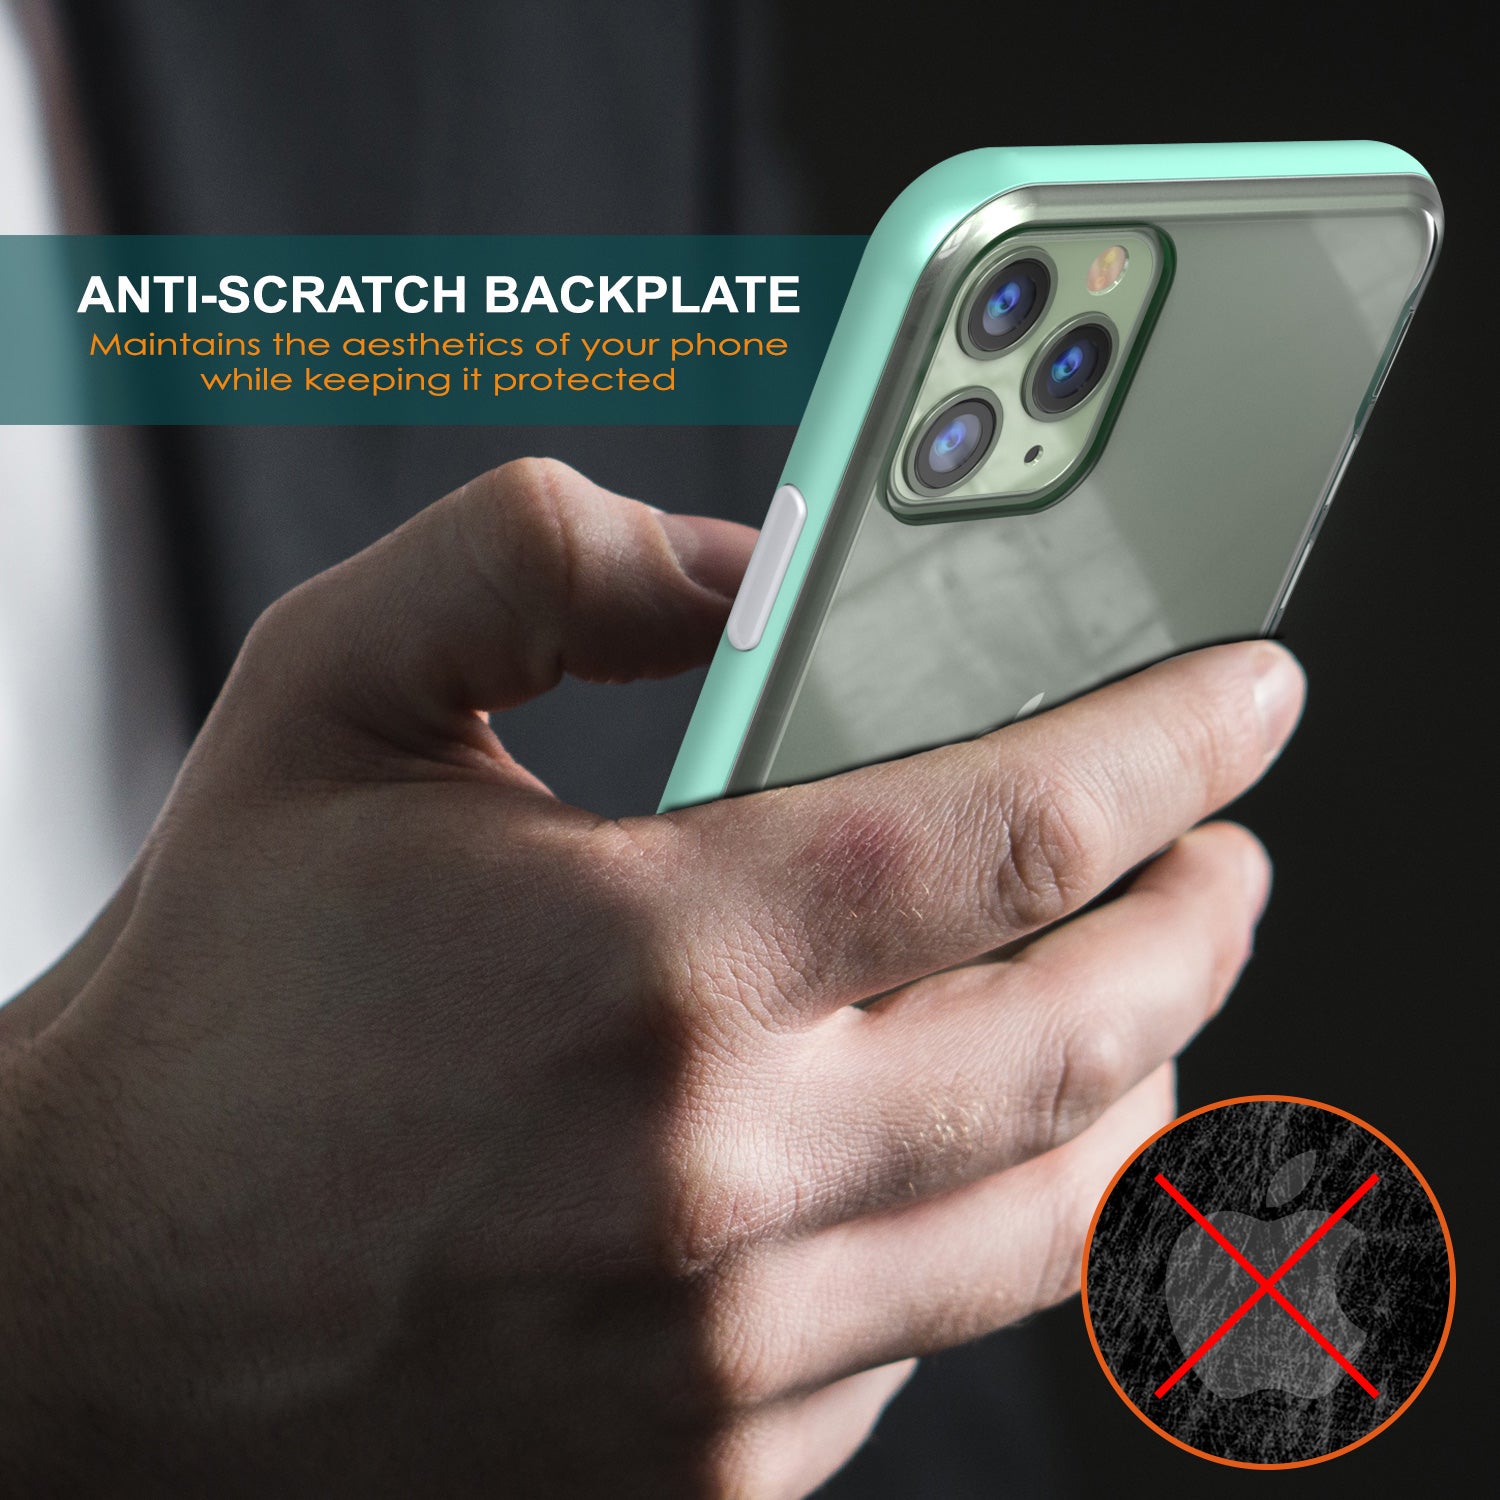 iPhone 11 Pro Max Case, PUNKcase [LUCID 3.0 Series] [Slim Fit] Armor Cover w/ Integrated Screen Protector [Teal]